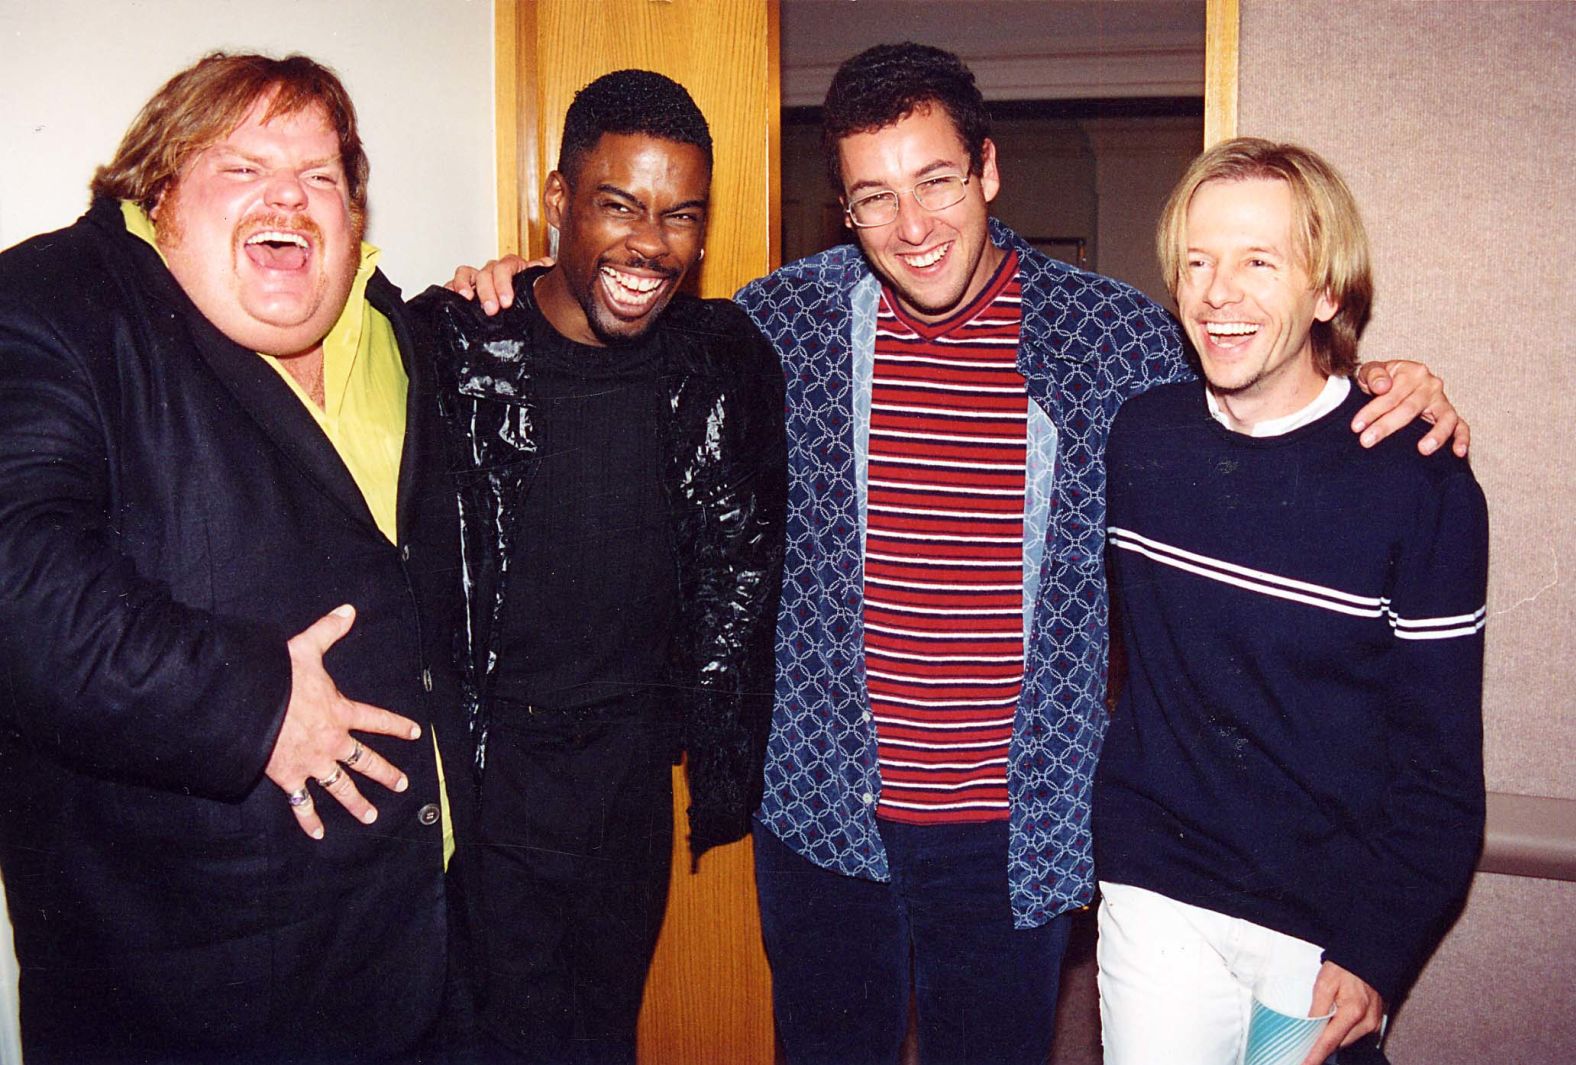 From left, Farley, Rock, Sandler and Spade pose for a photo in 1997.